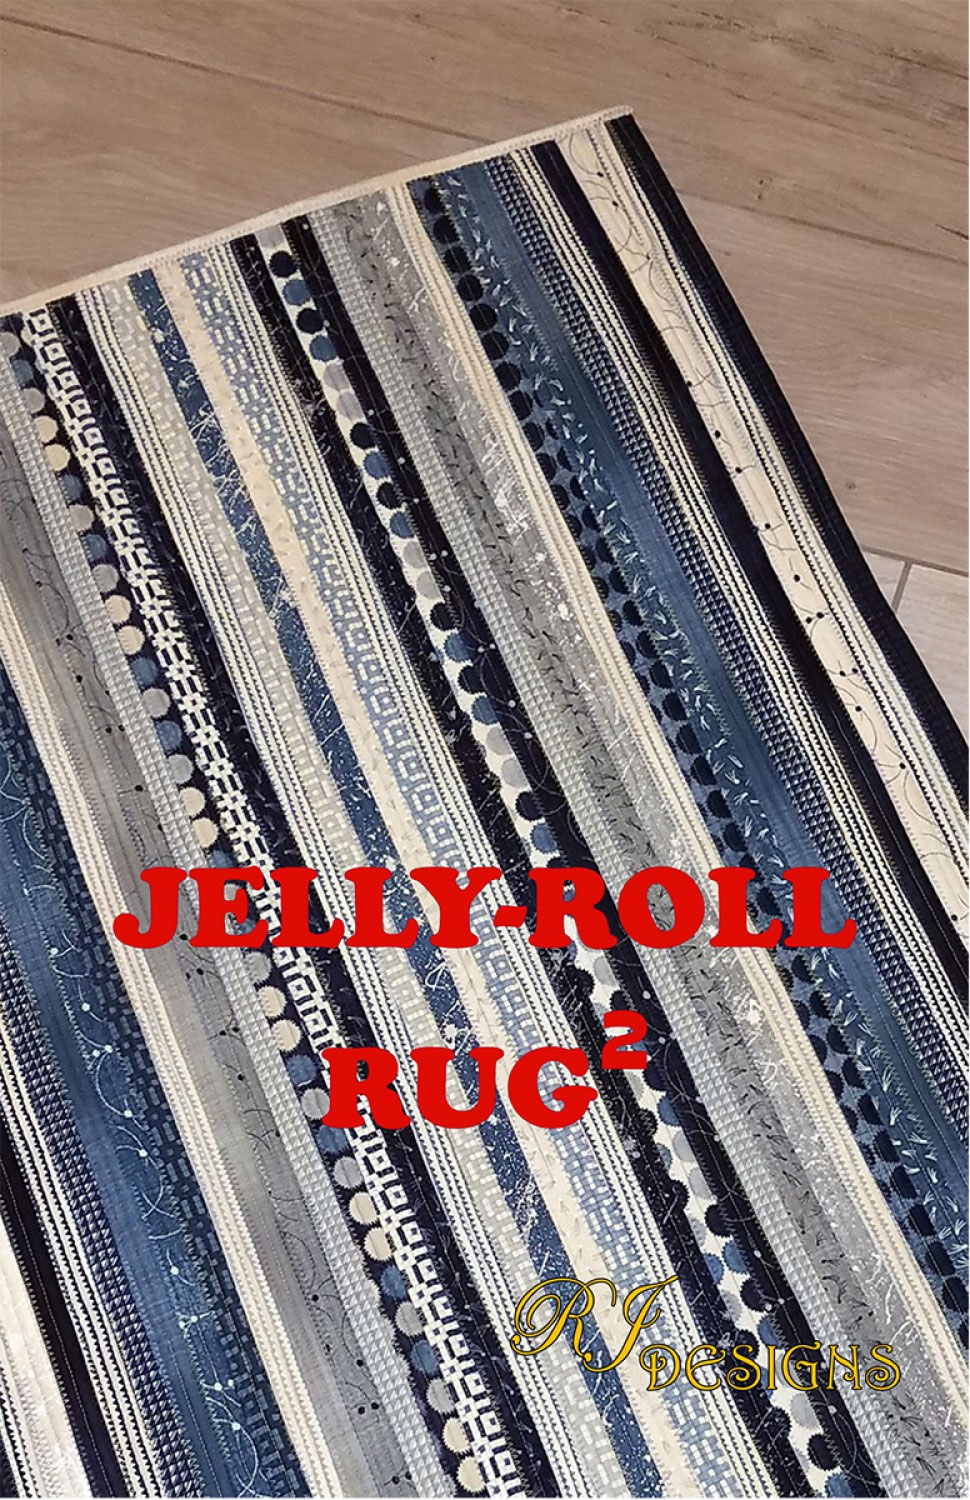 Jelly-Roll-Rug-2-sewing-pattern-from-RJ-designs-front